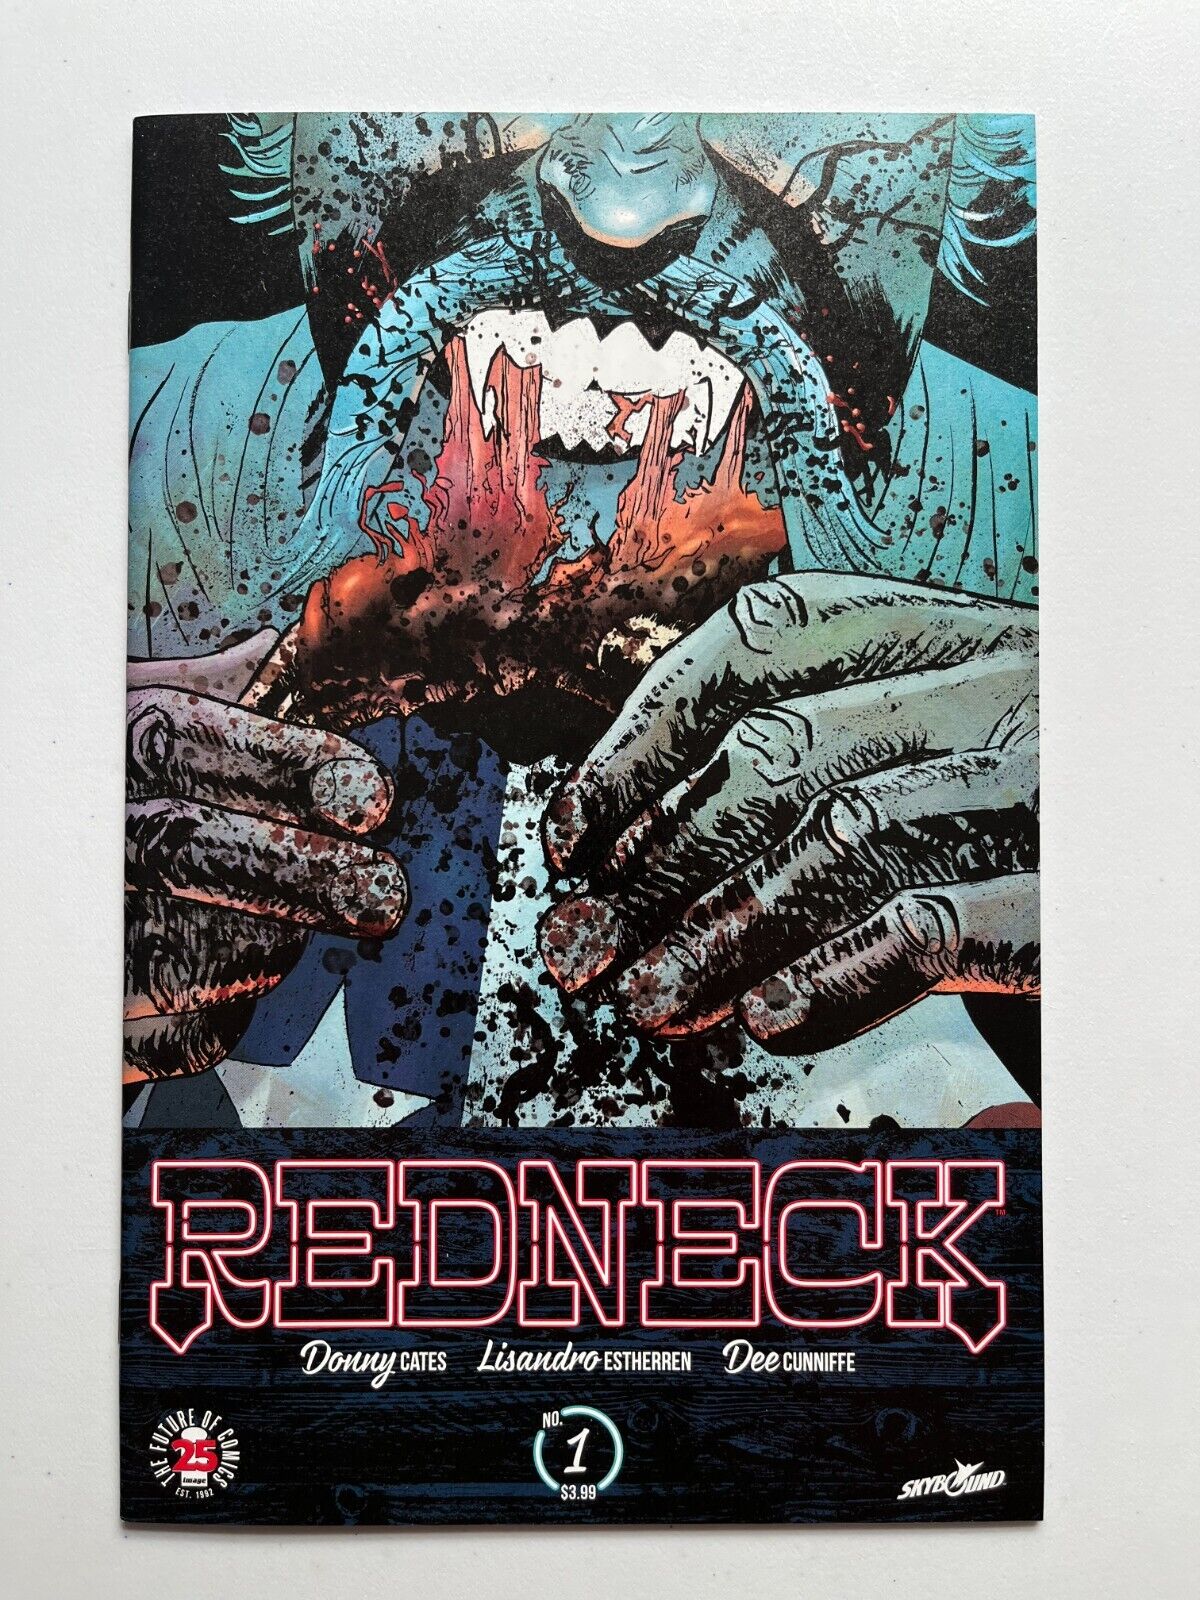 Redneck 1 Regular Gold Silver or 2nd Print - YOU CHOOSE - Donny Cates - NM+ CGC 